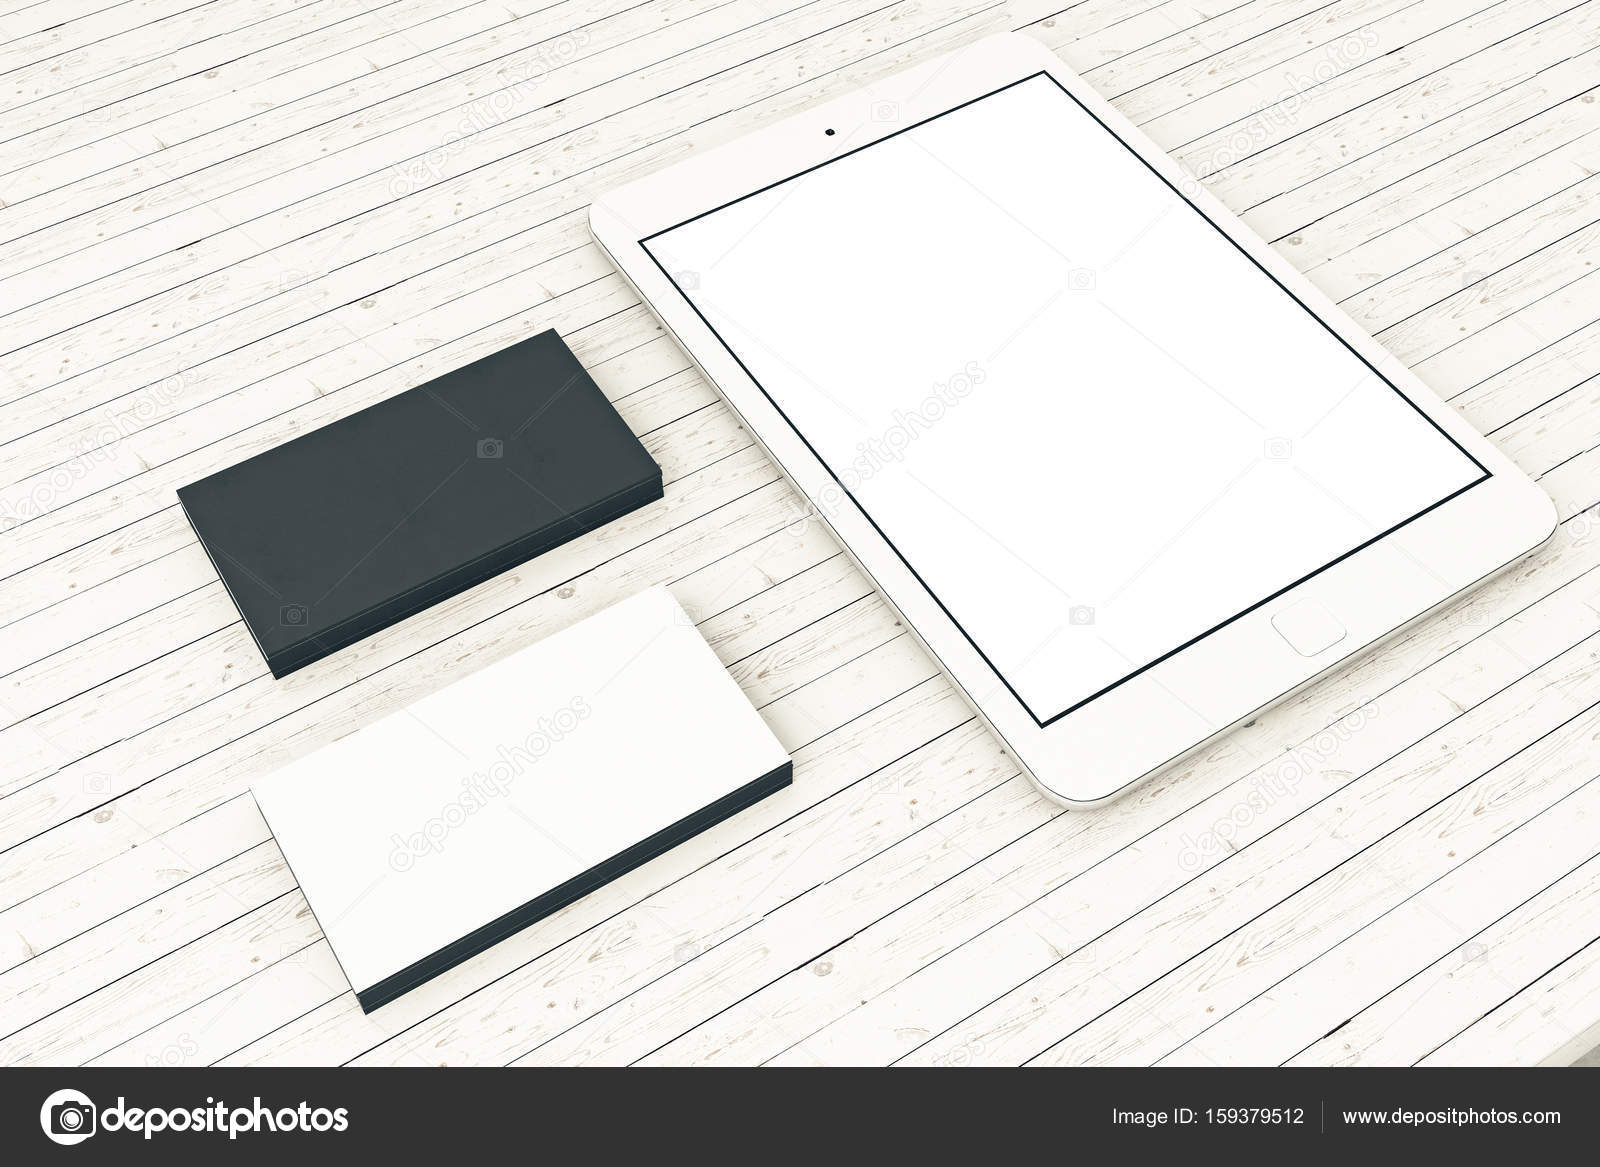 depositphotos_159379512-stock-photo-empty-tablet-and-business-cards.jpg